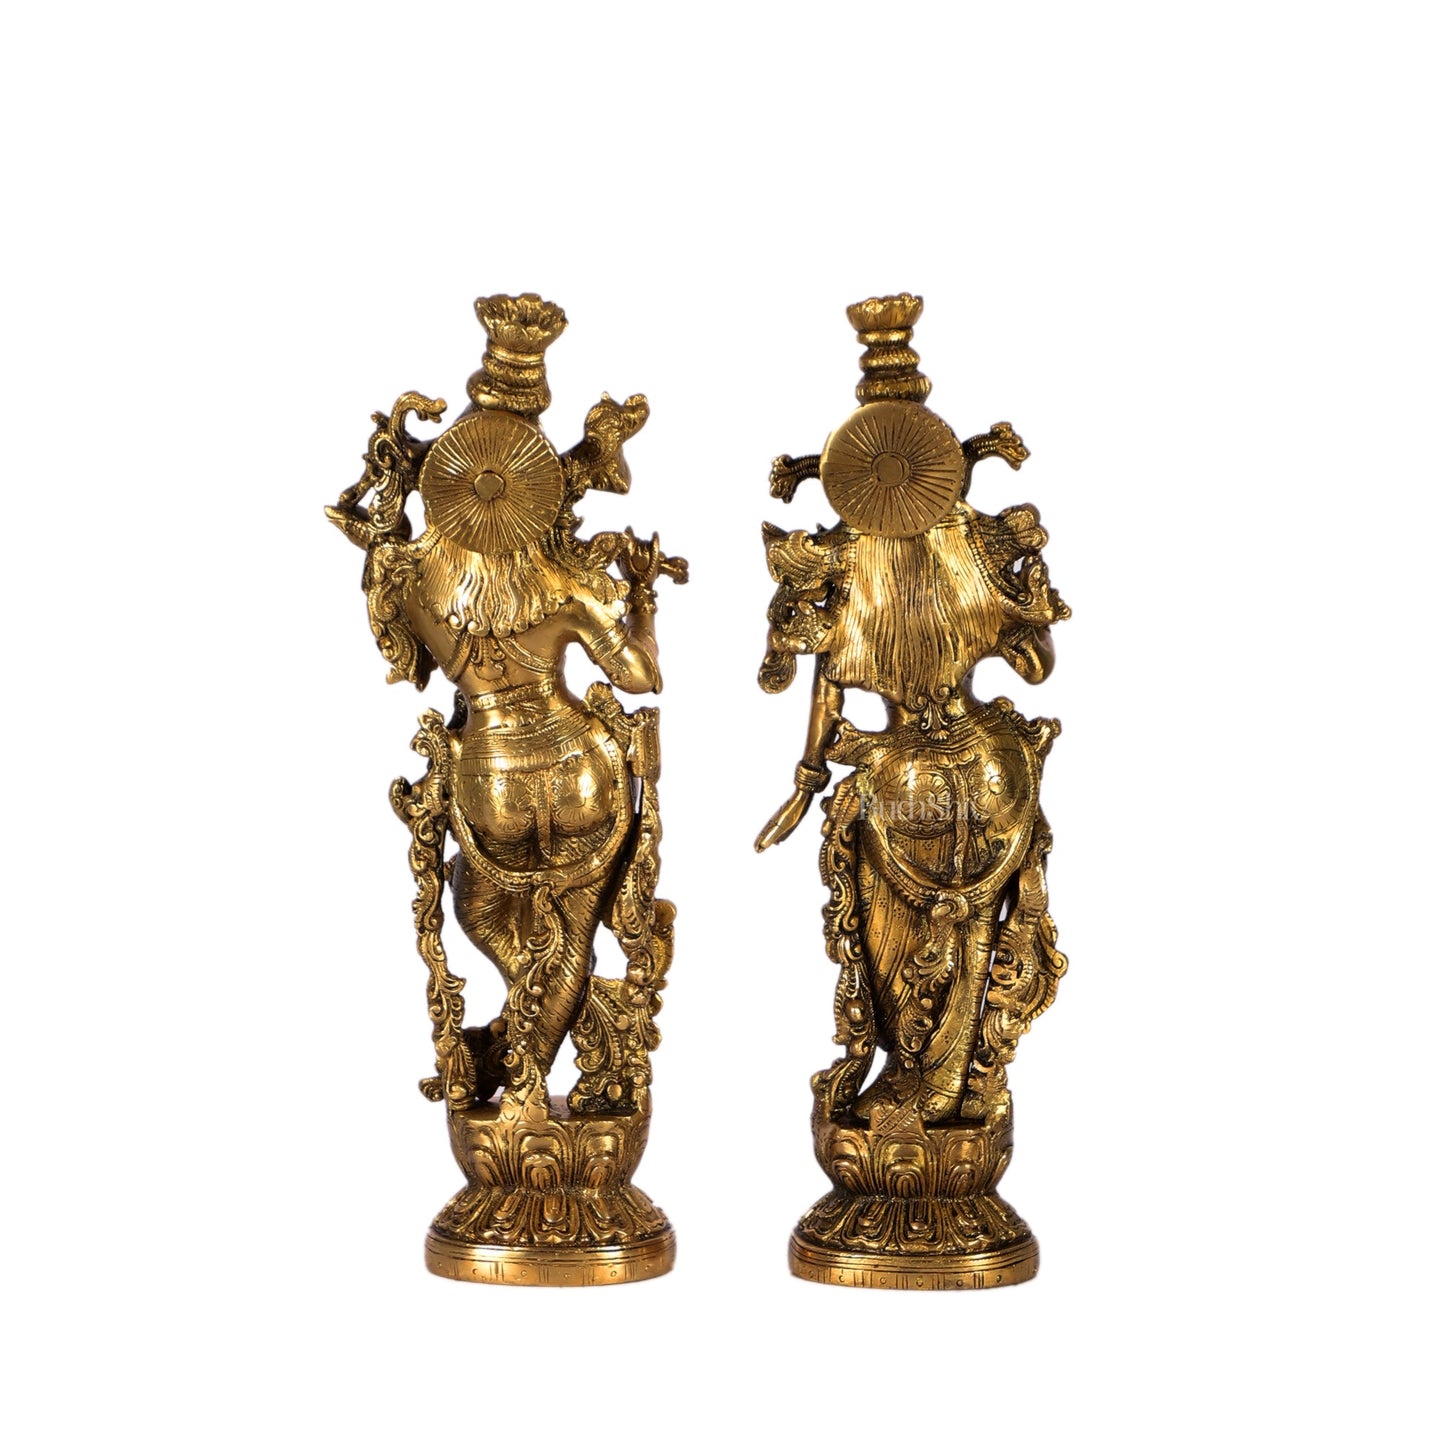 Pure Brass Superfine Radha Krishna Statues - 14" Height | Finely Carved - Budhshiv.com